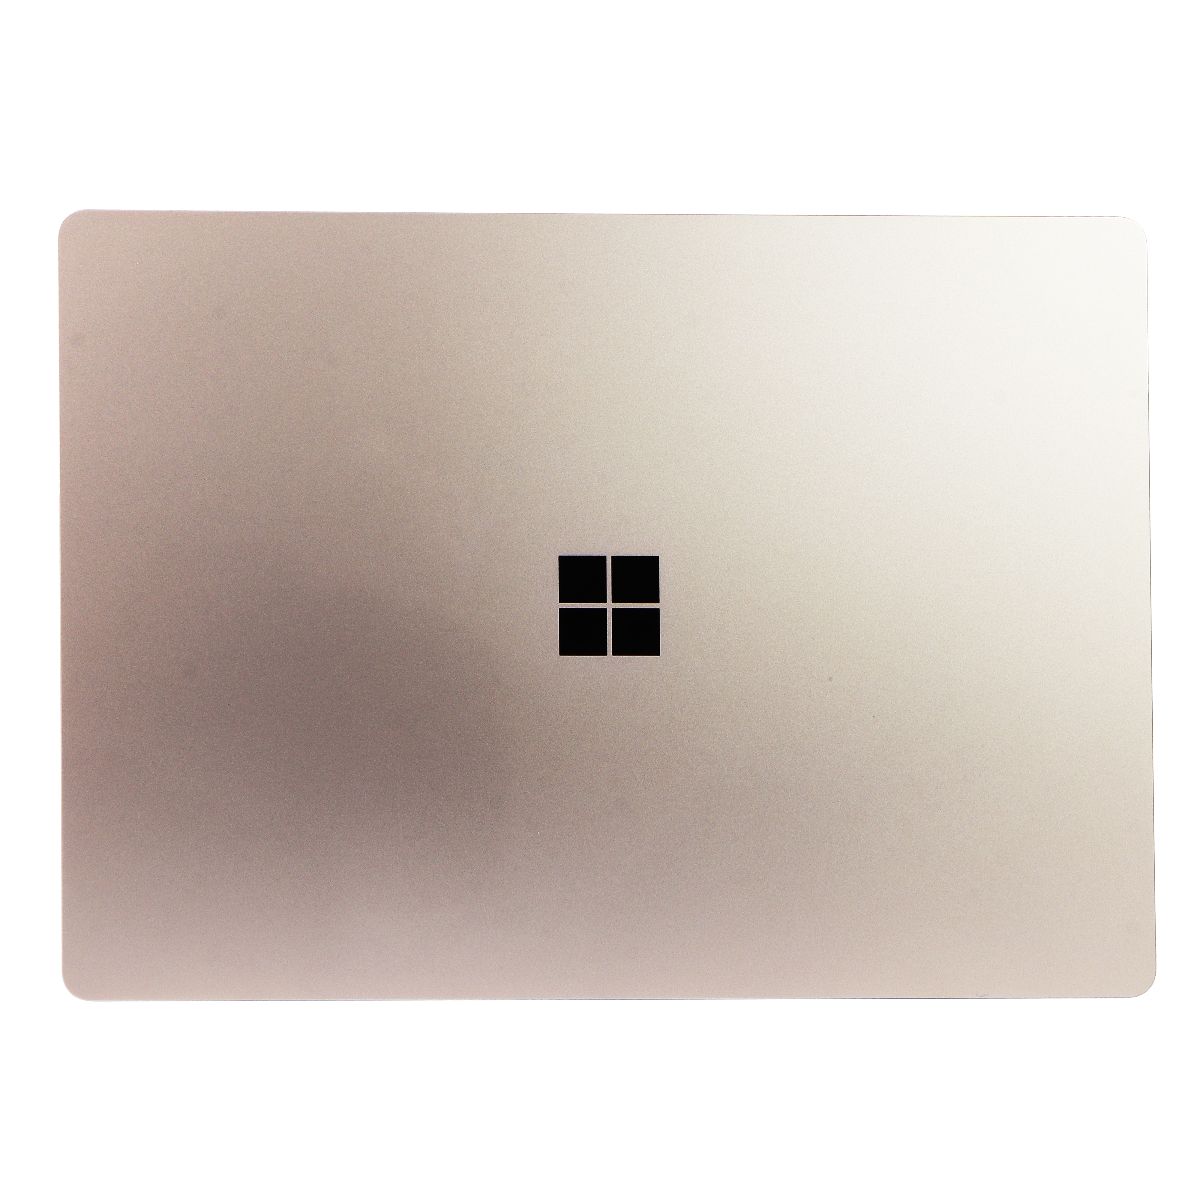 Microsoft Surface Laptop 3 (13.5-inch) 1868 (i5-1035G7/256GB/8GB) - Sandstone iPads, Tablets & eBook Readers Microsoft    - Simple Cell Bulk Wholesale Pricing - USA Seller